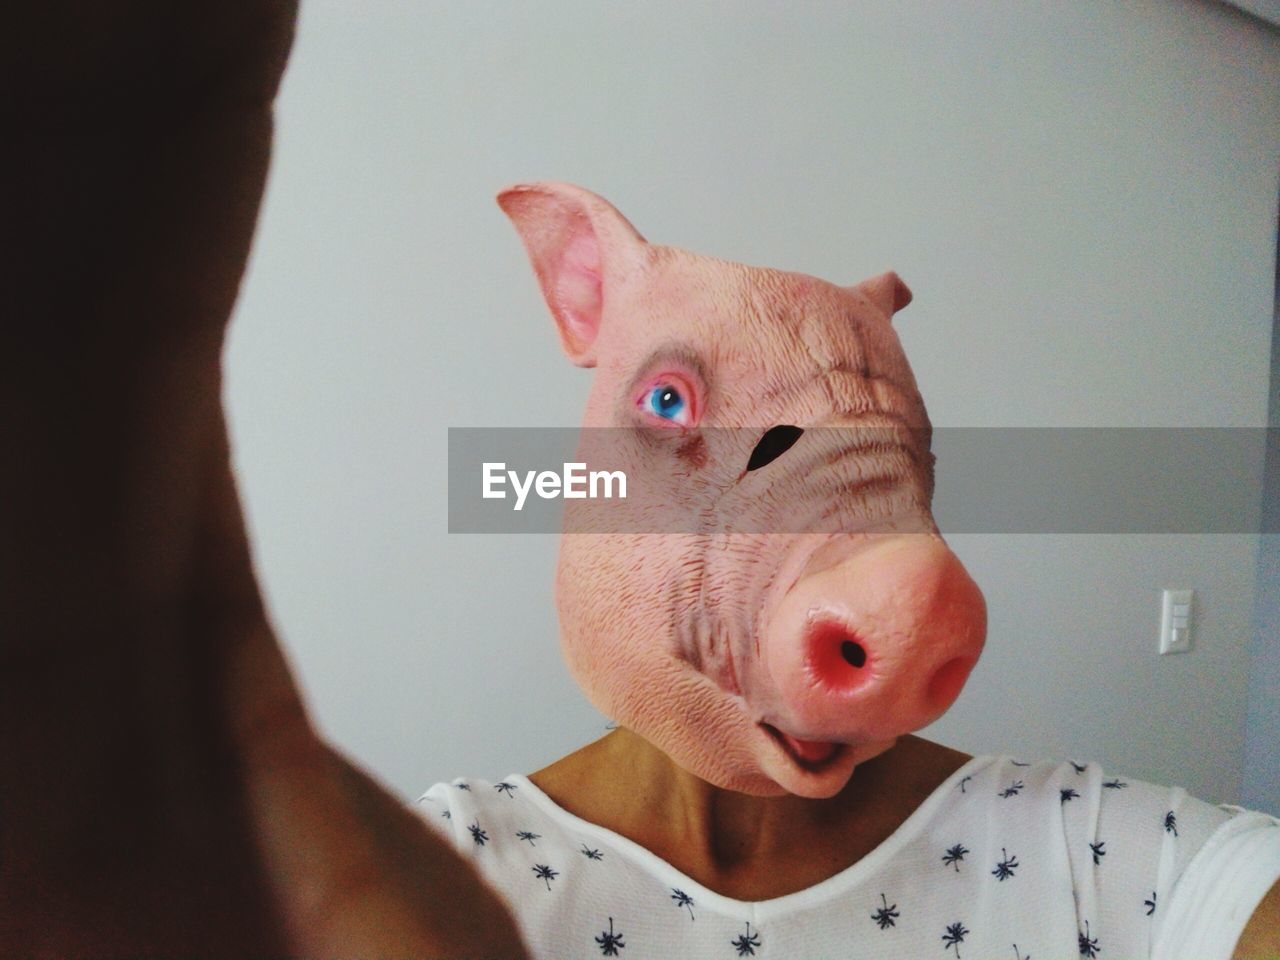 Woman wearing mask with pig head shape